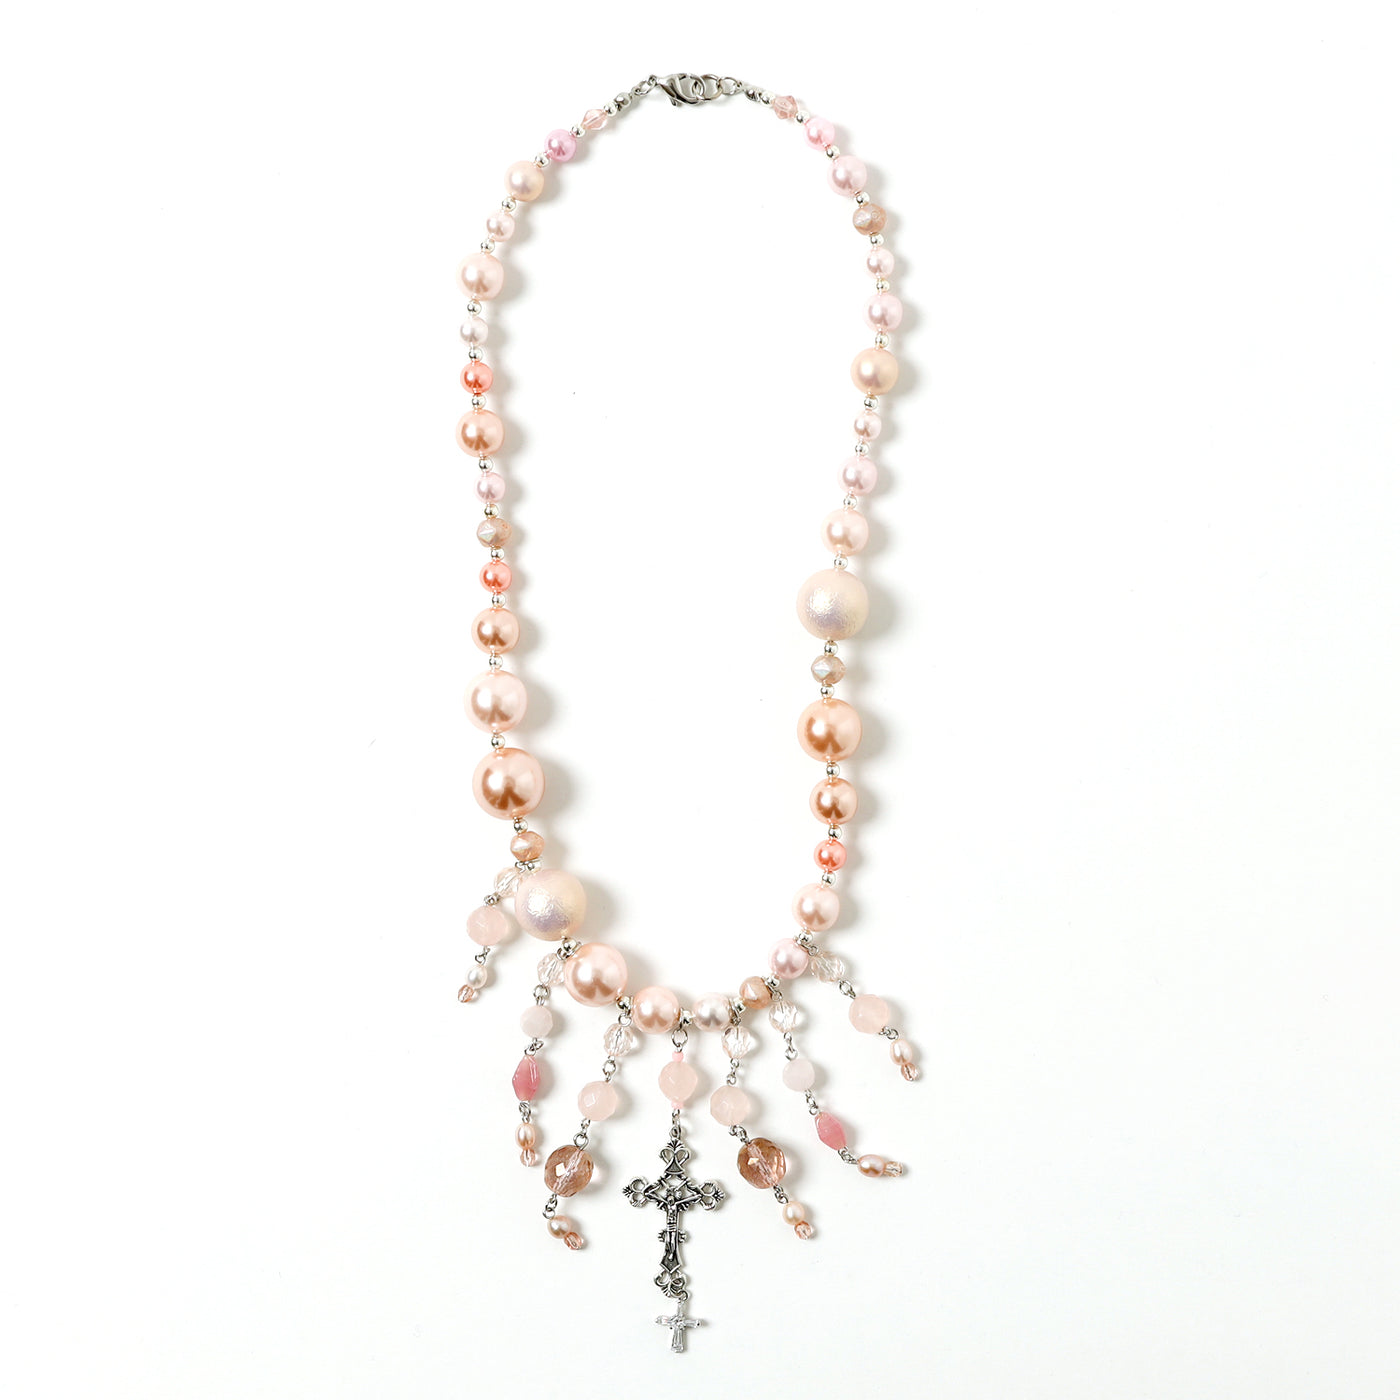 Blooming / ブルーミング / Necklace / PINK